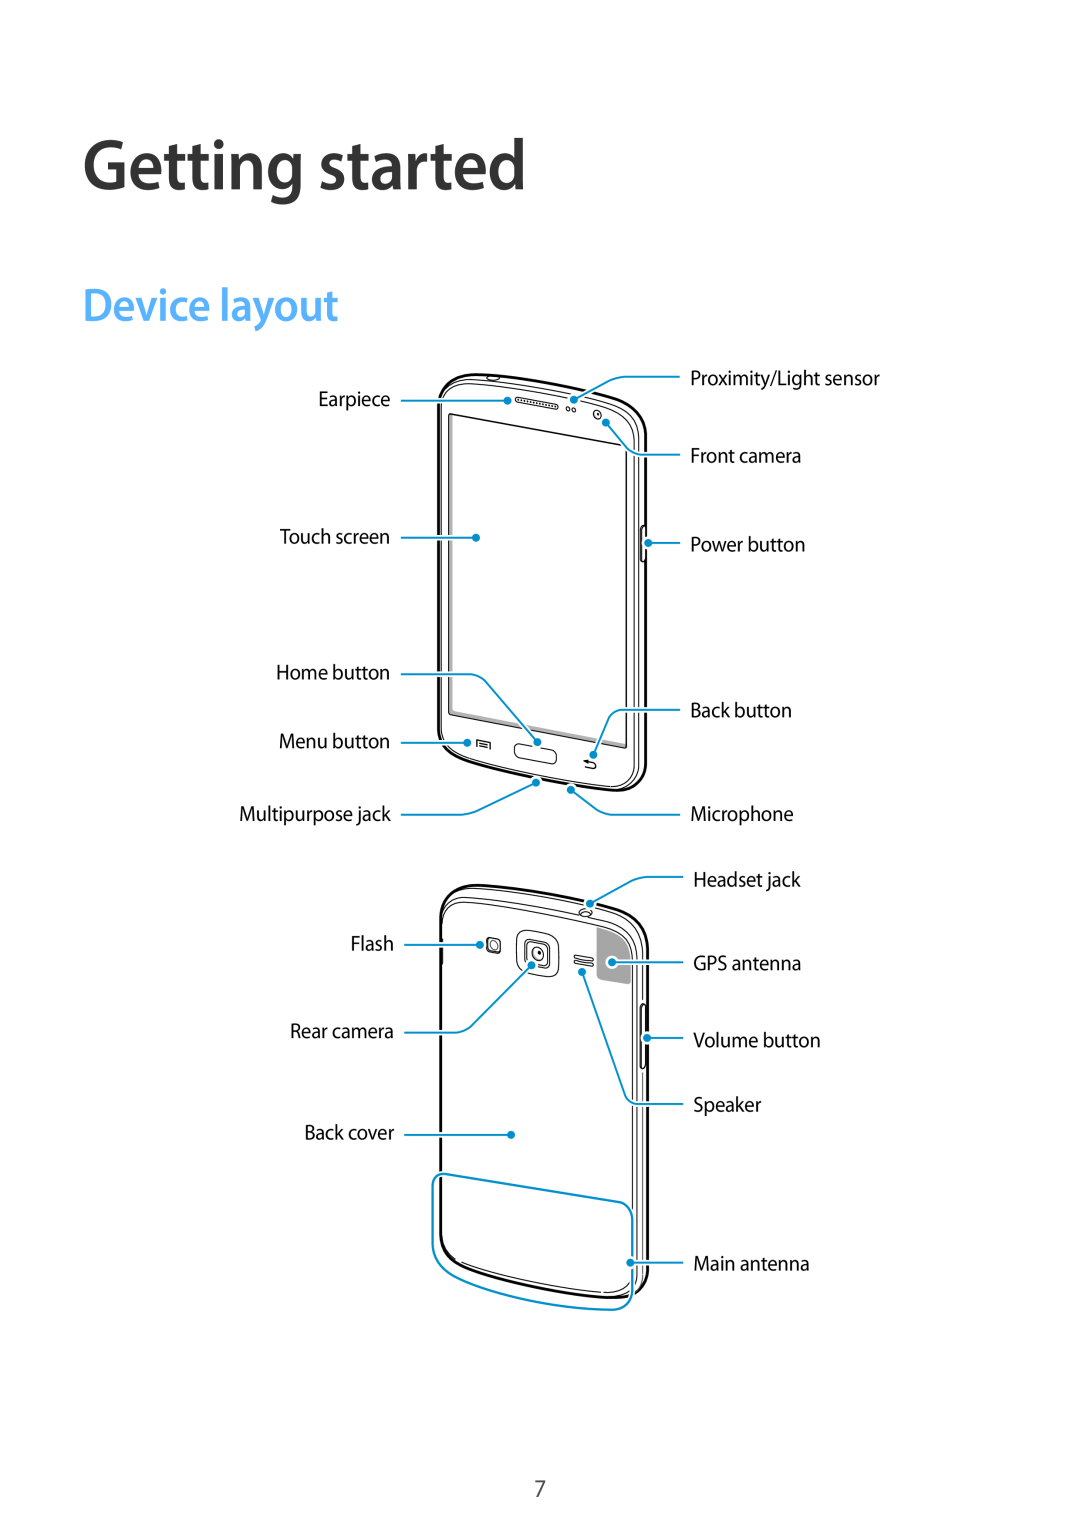 Samsung SM-G7105ZWABOG manual Getting started, Device layout, Proximity/Light sensor Earpiece Front camera, Touch screen 